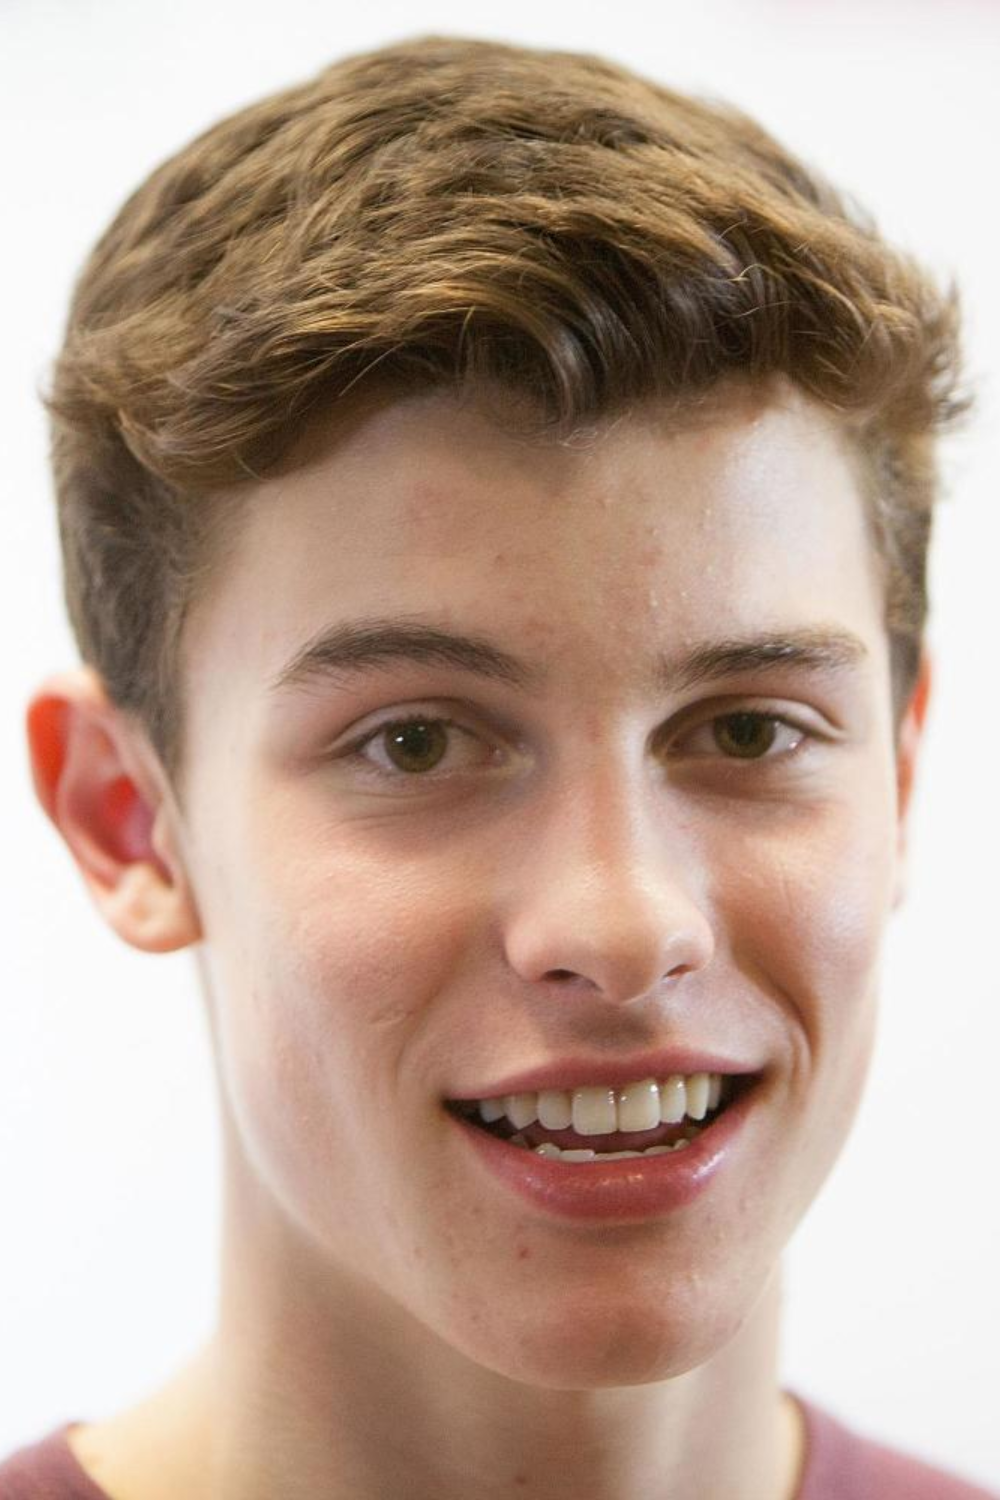 Shawn Mendes Hairstyle - Some Tips to Get Hairstyles like this Canadian  singer [UPDATED 2023] - Men's Hairstyles & Haircuts X